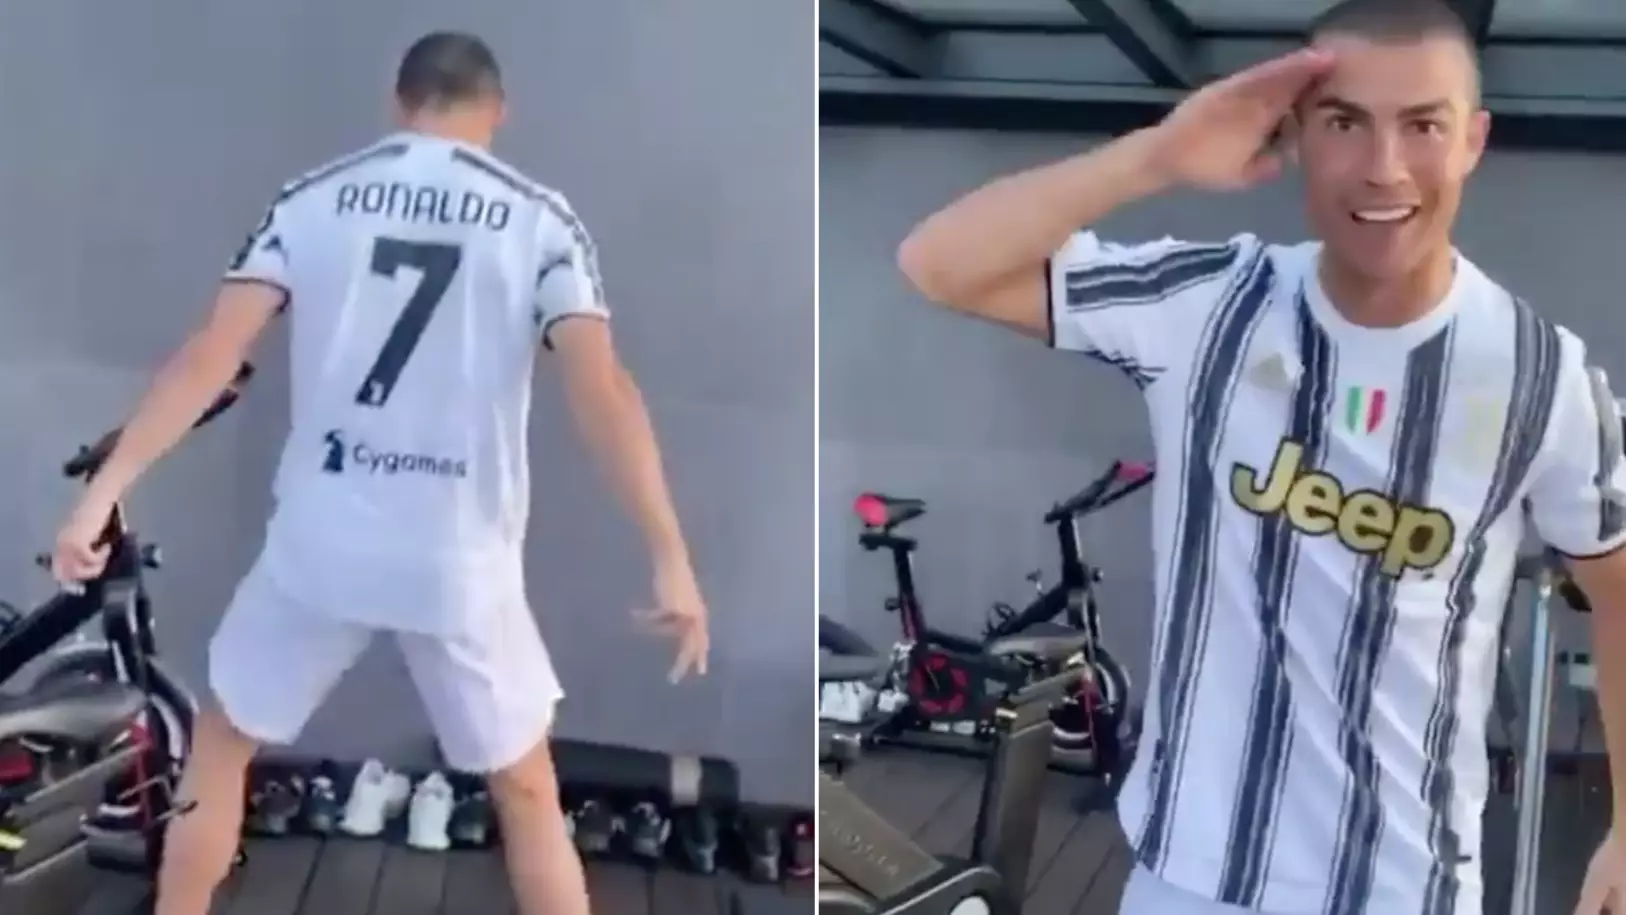 Cristiano Ronaldo Puts On Full Kit To Send Message To Juventus Ahead Of Barcelona Clash